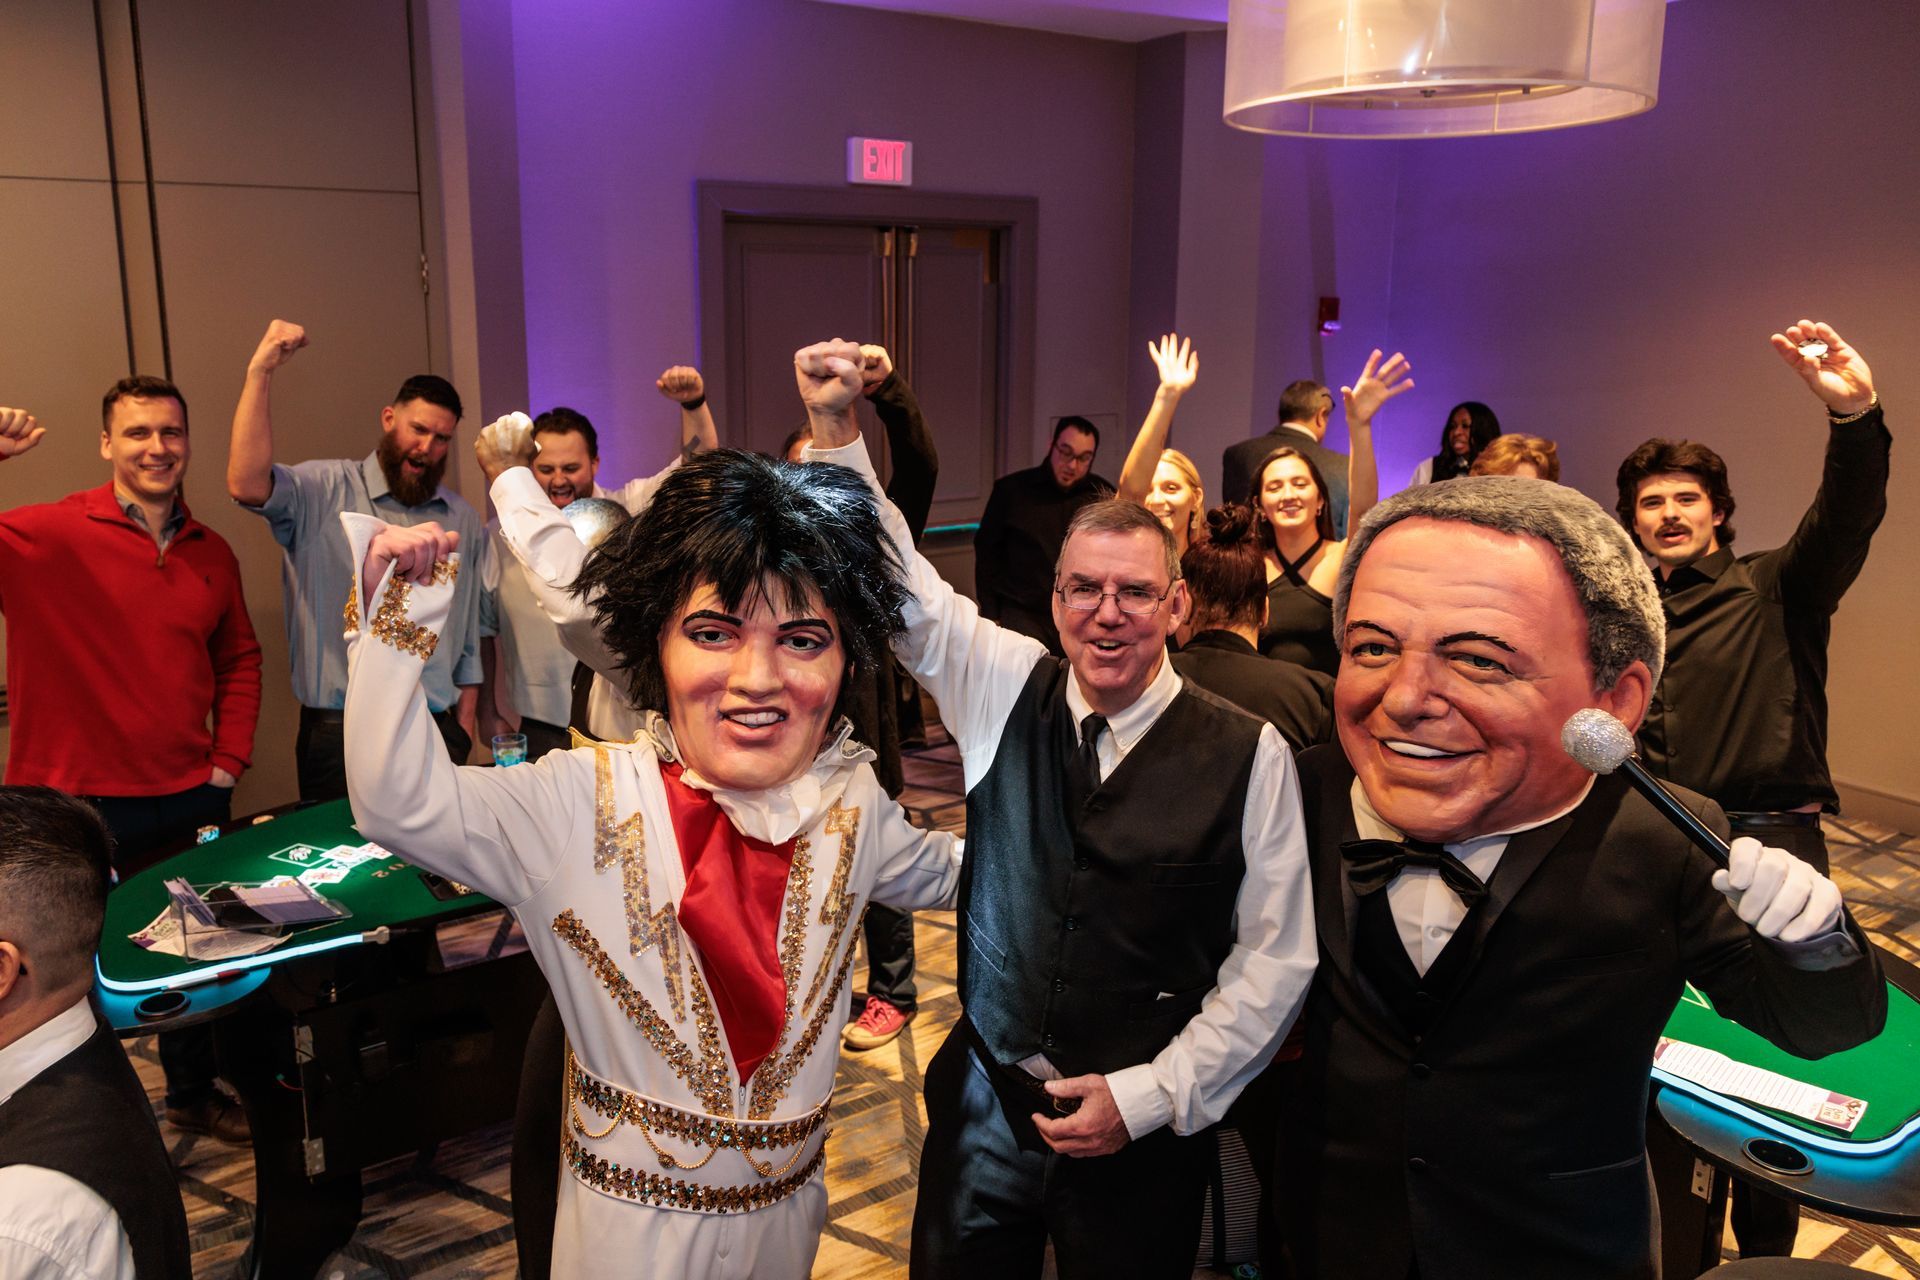 A group of people are standing in a room with elvis presley and frank sinatra masks.